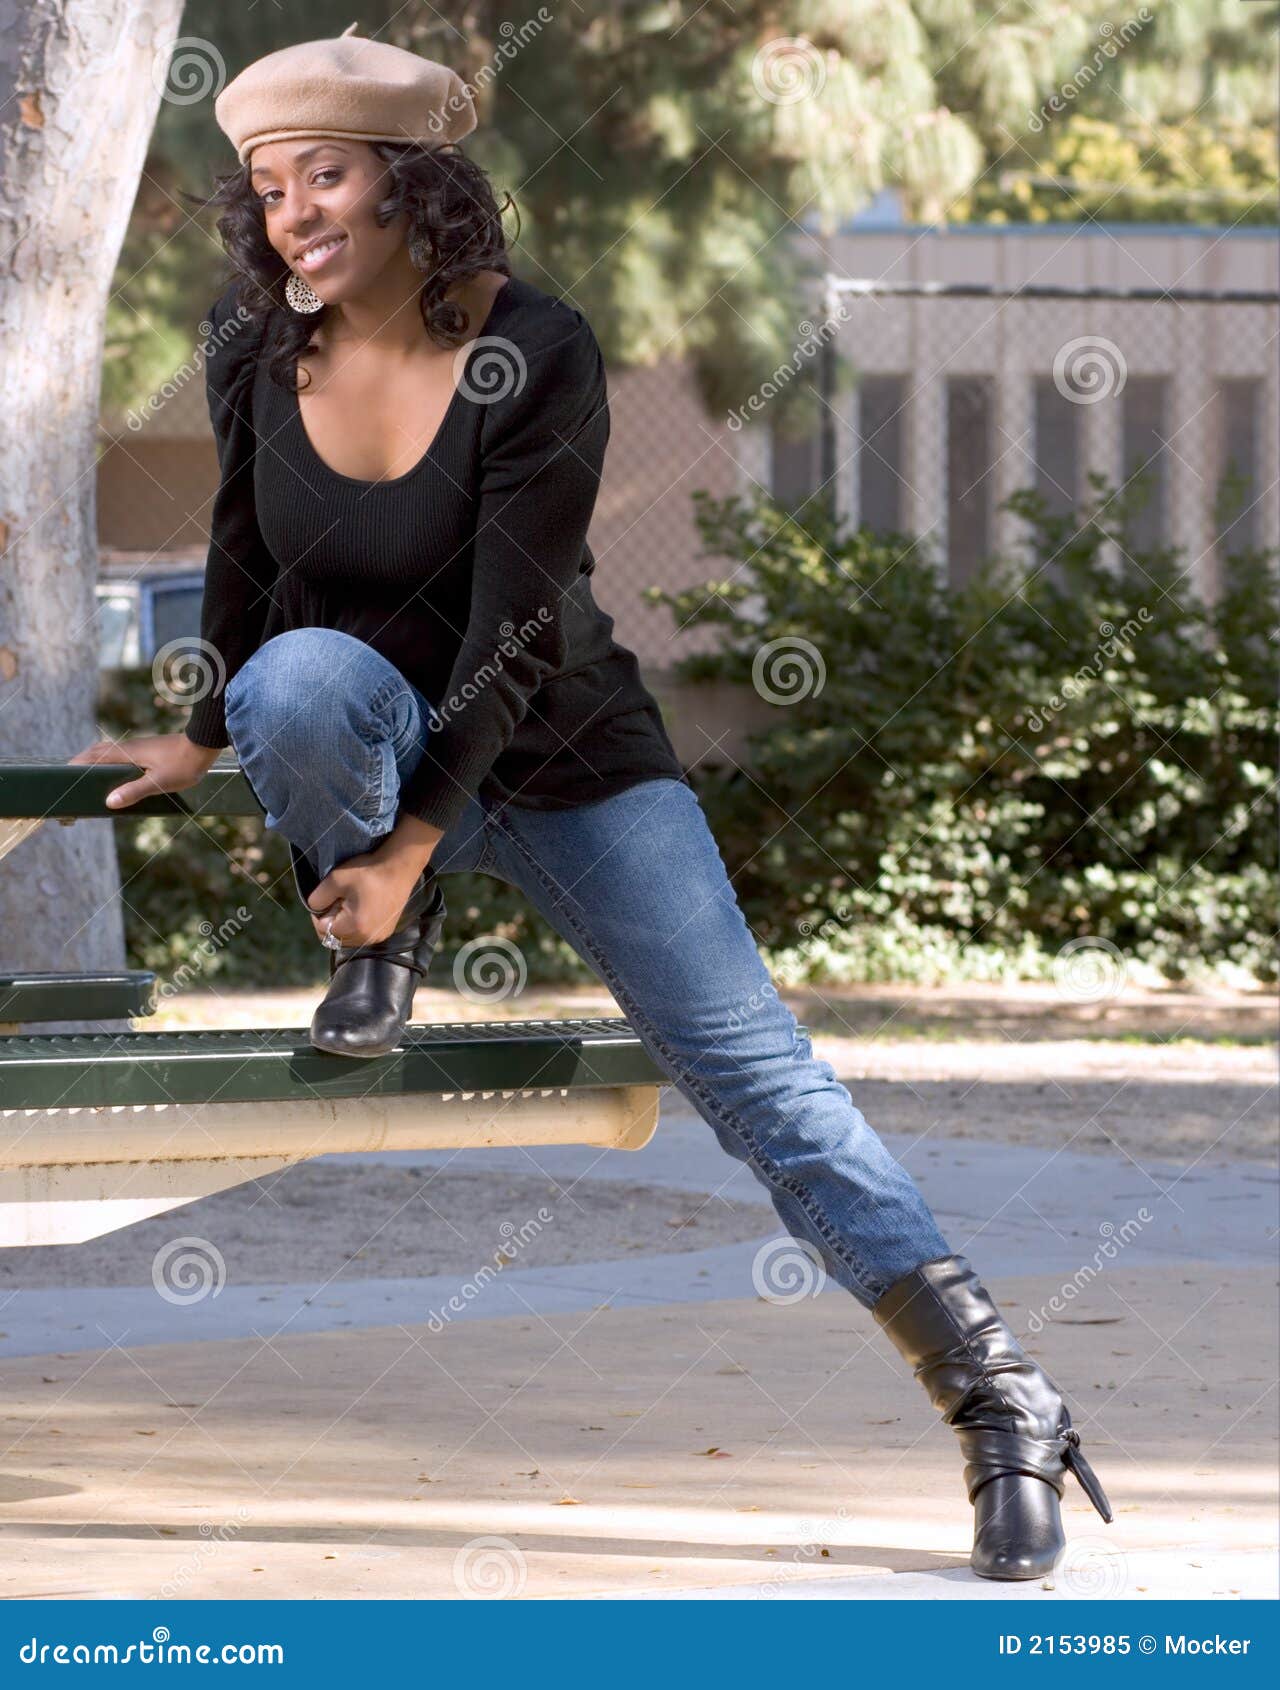 Hot girls in jeans and boots 9 821 Girl Jeans Boots Photos Free Royalty Free Stock Photos From Dreamstime